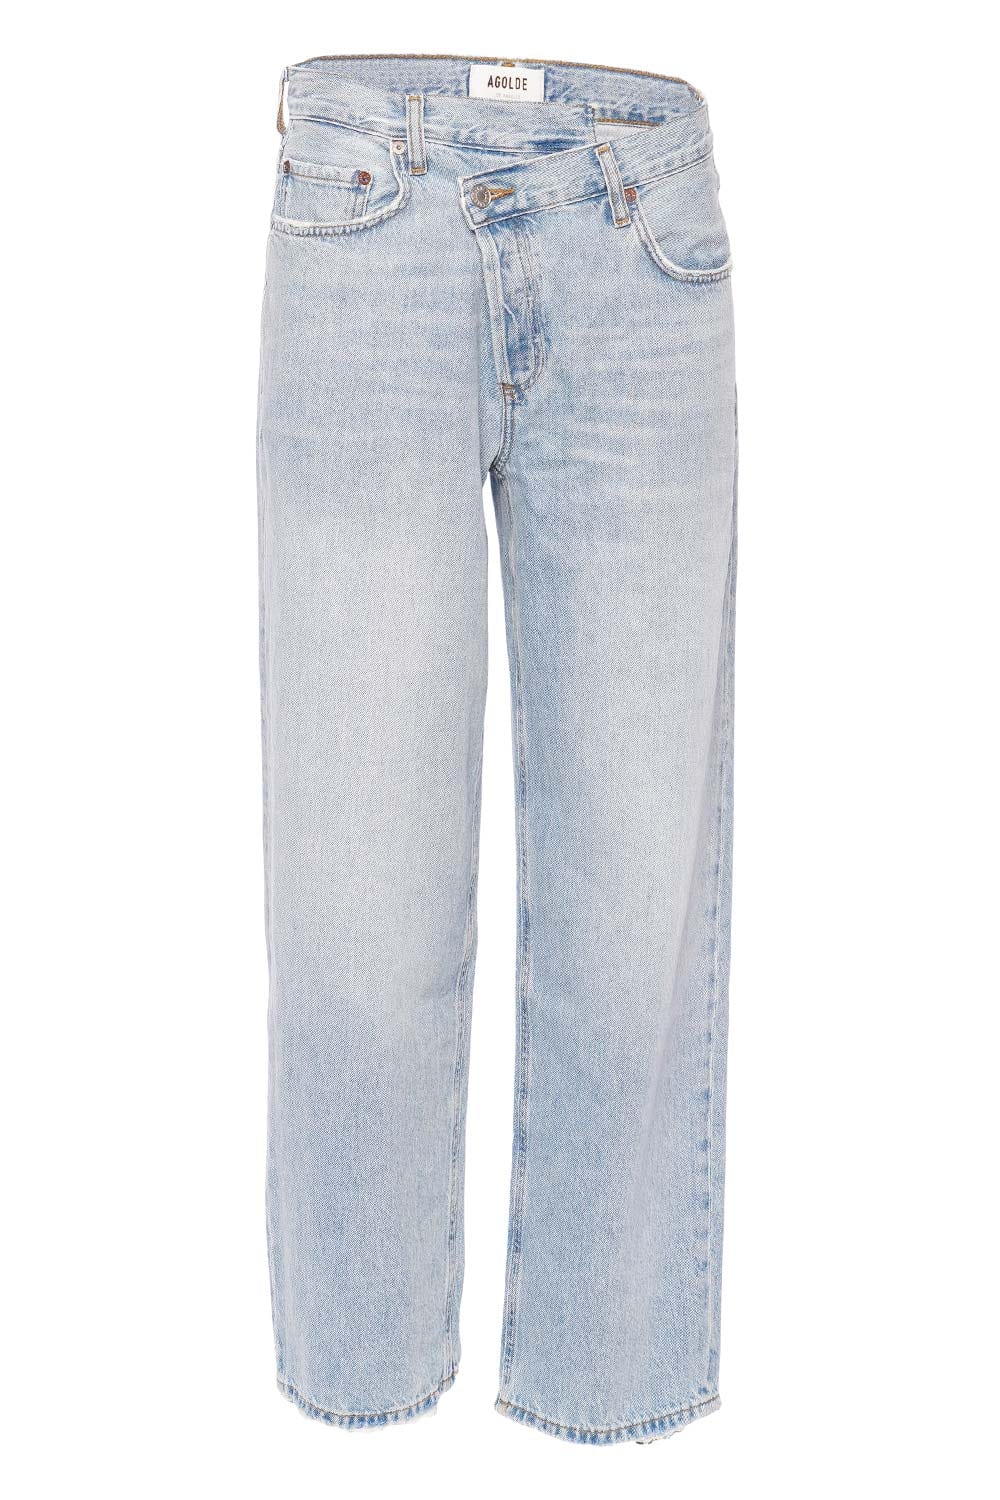 Criss Cross Wired Straight Leg Jeans